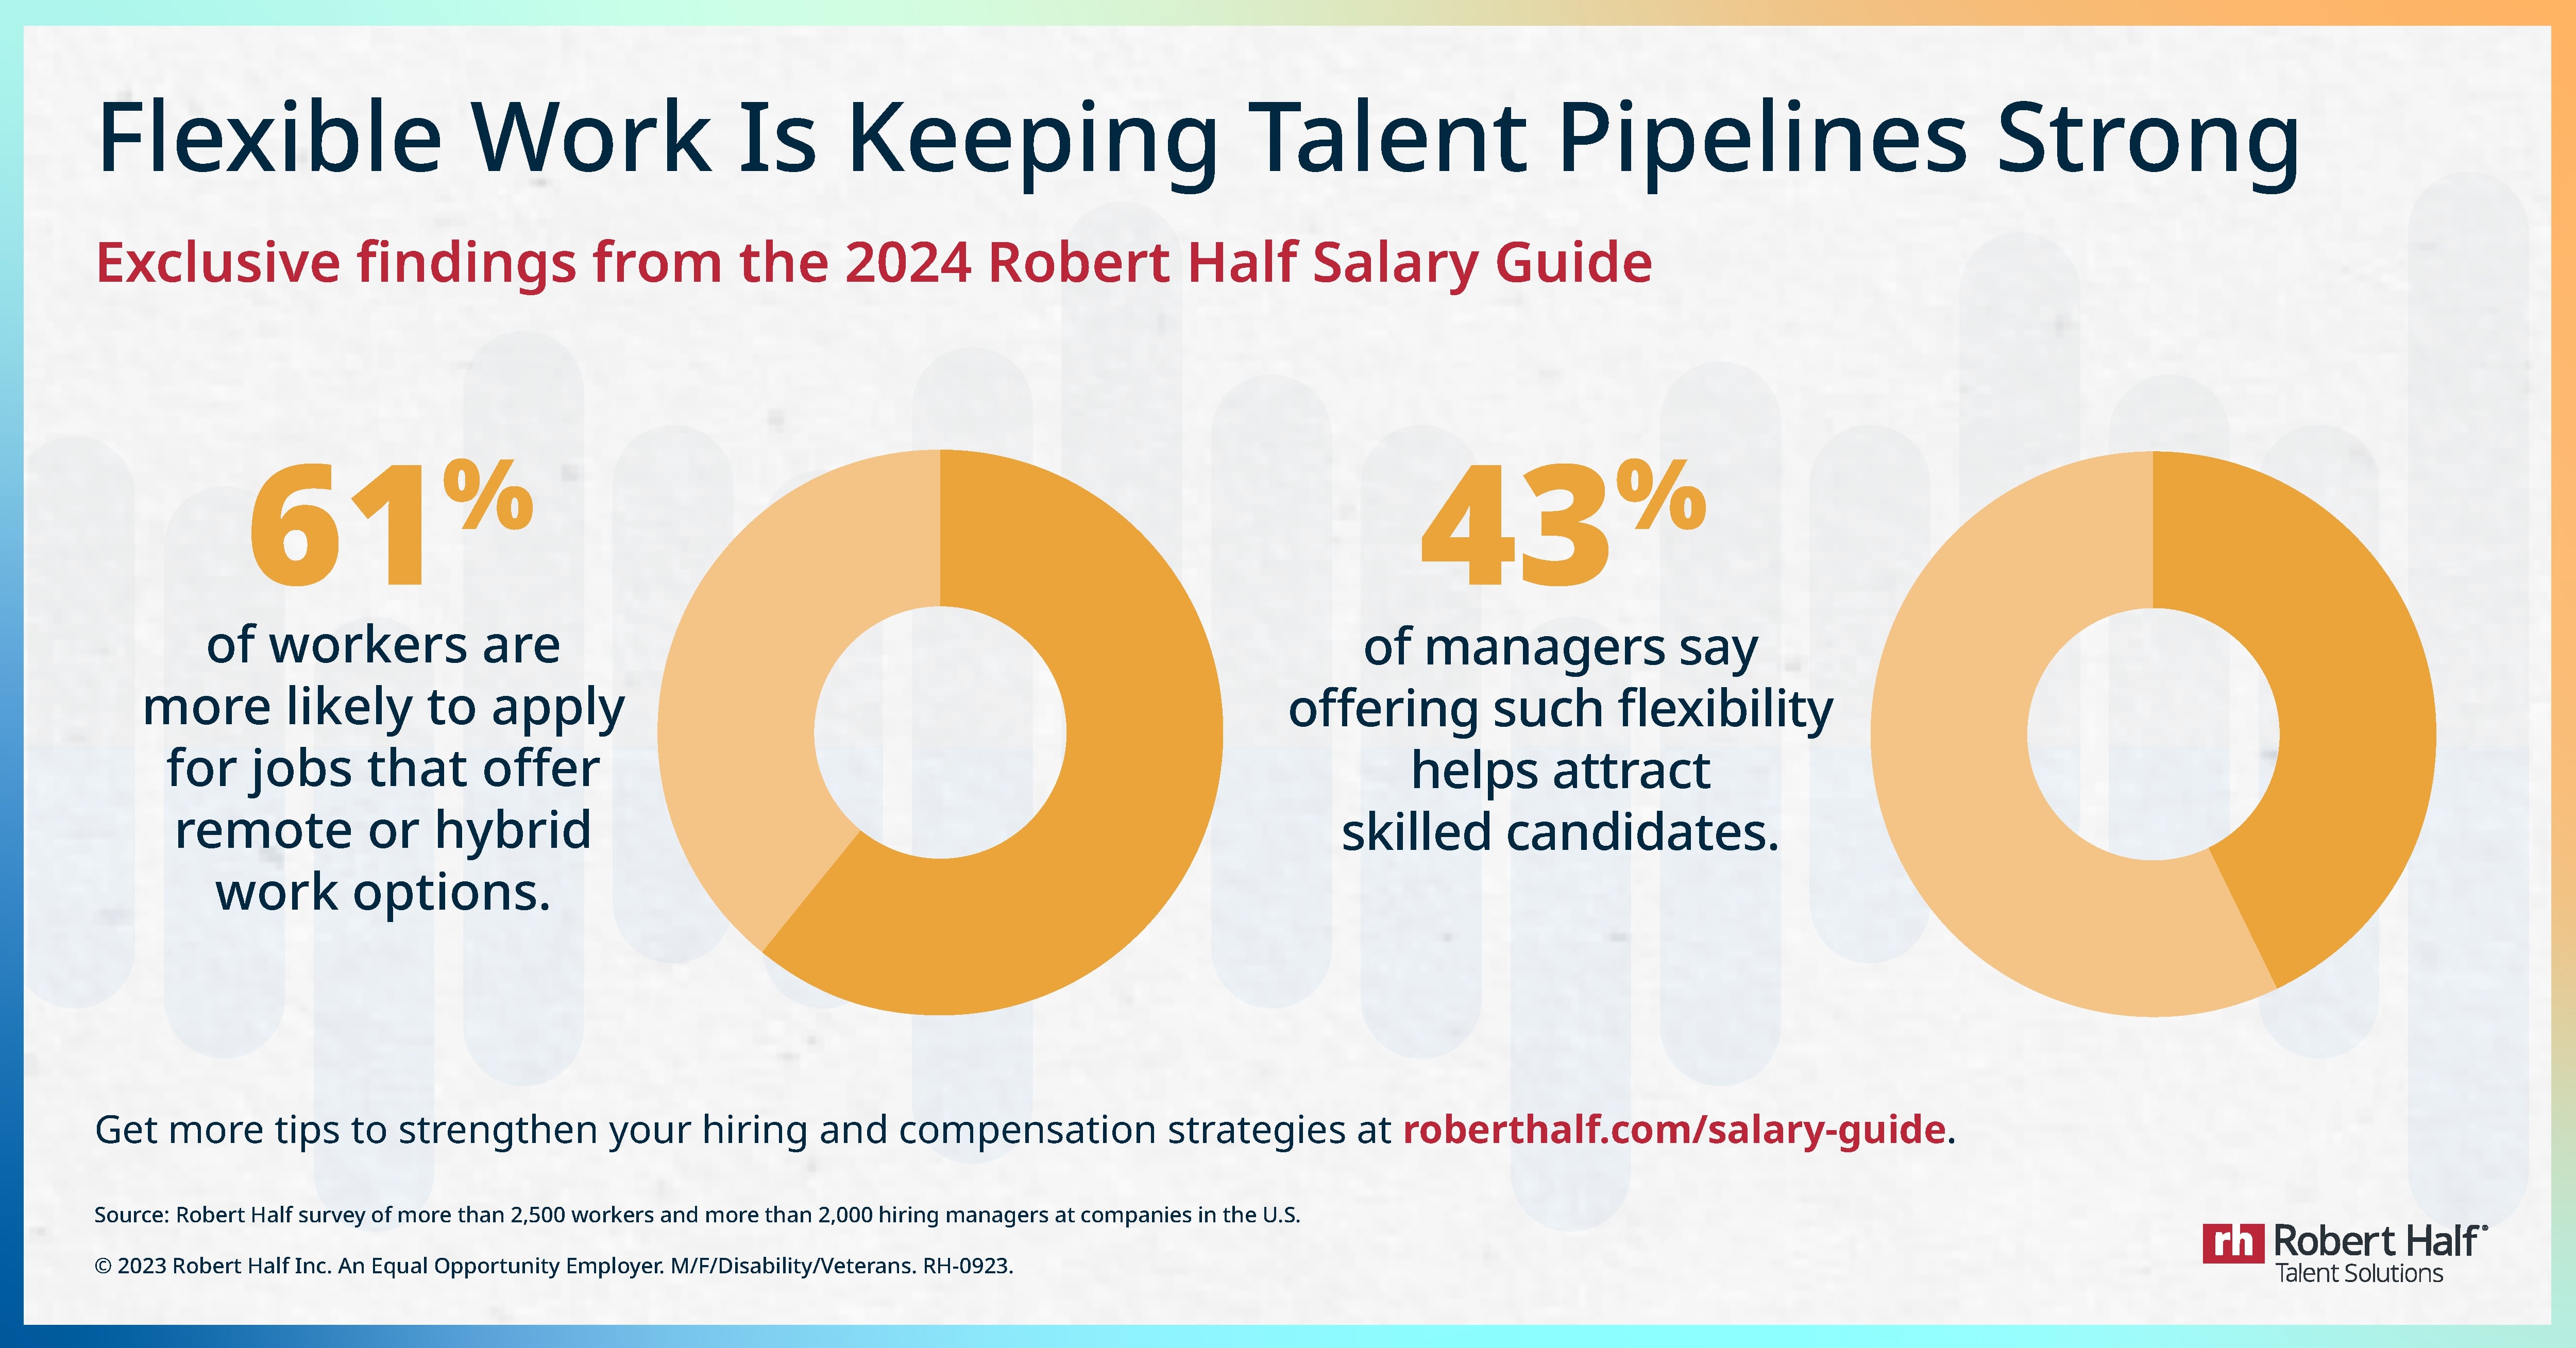 Flexible work is keeping talent pipeline strong